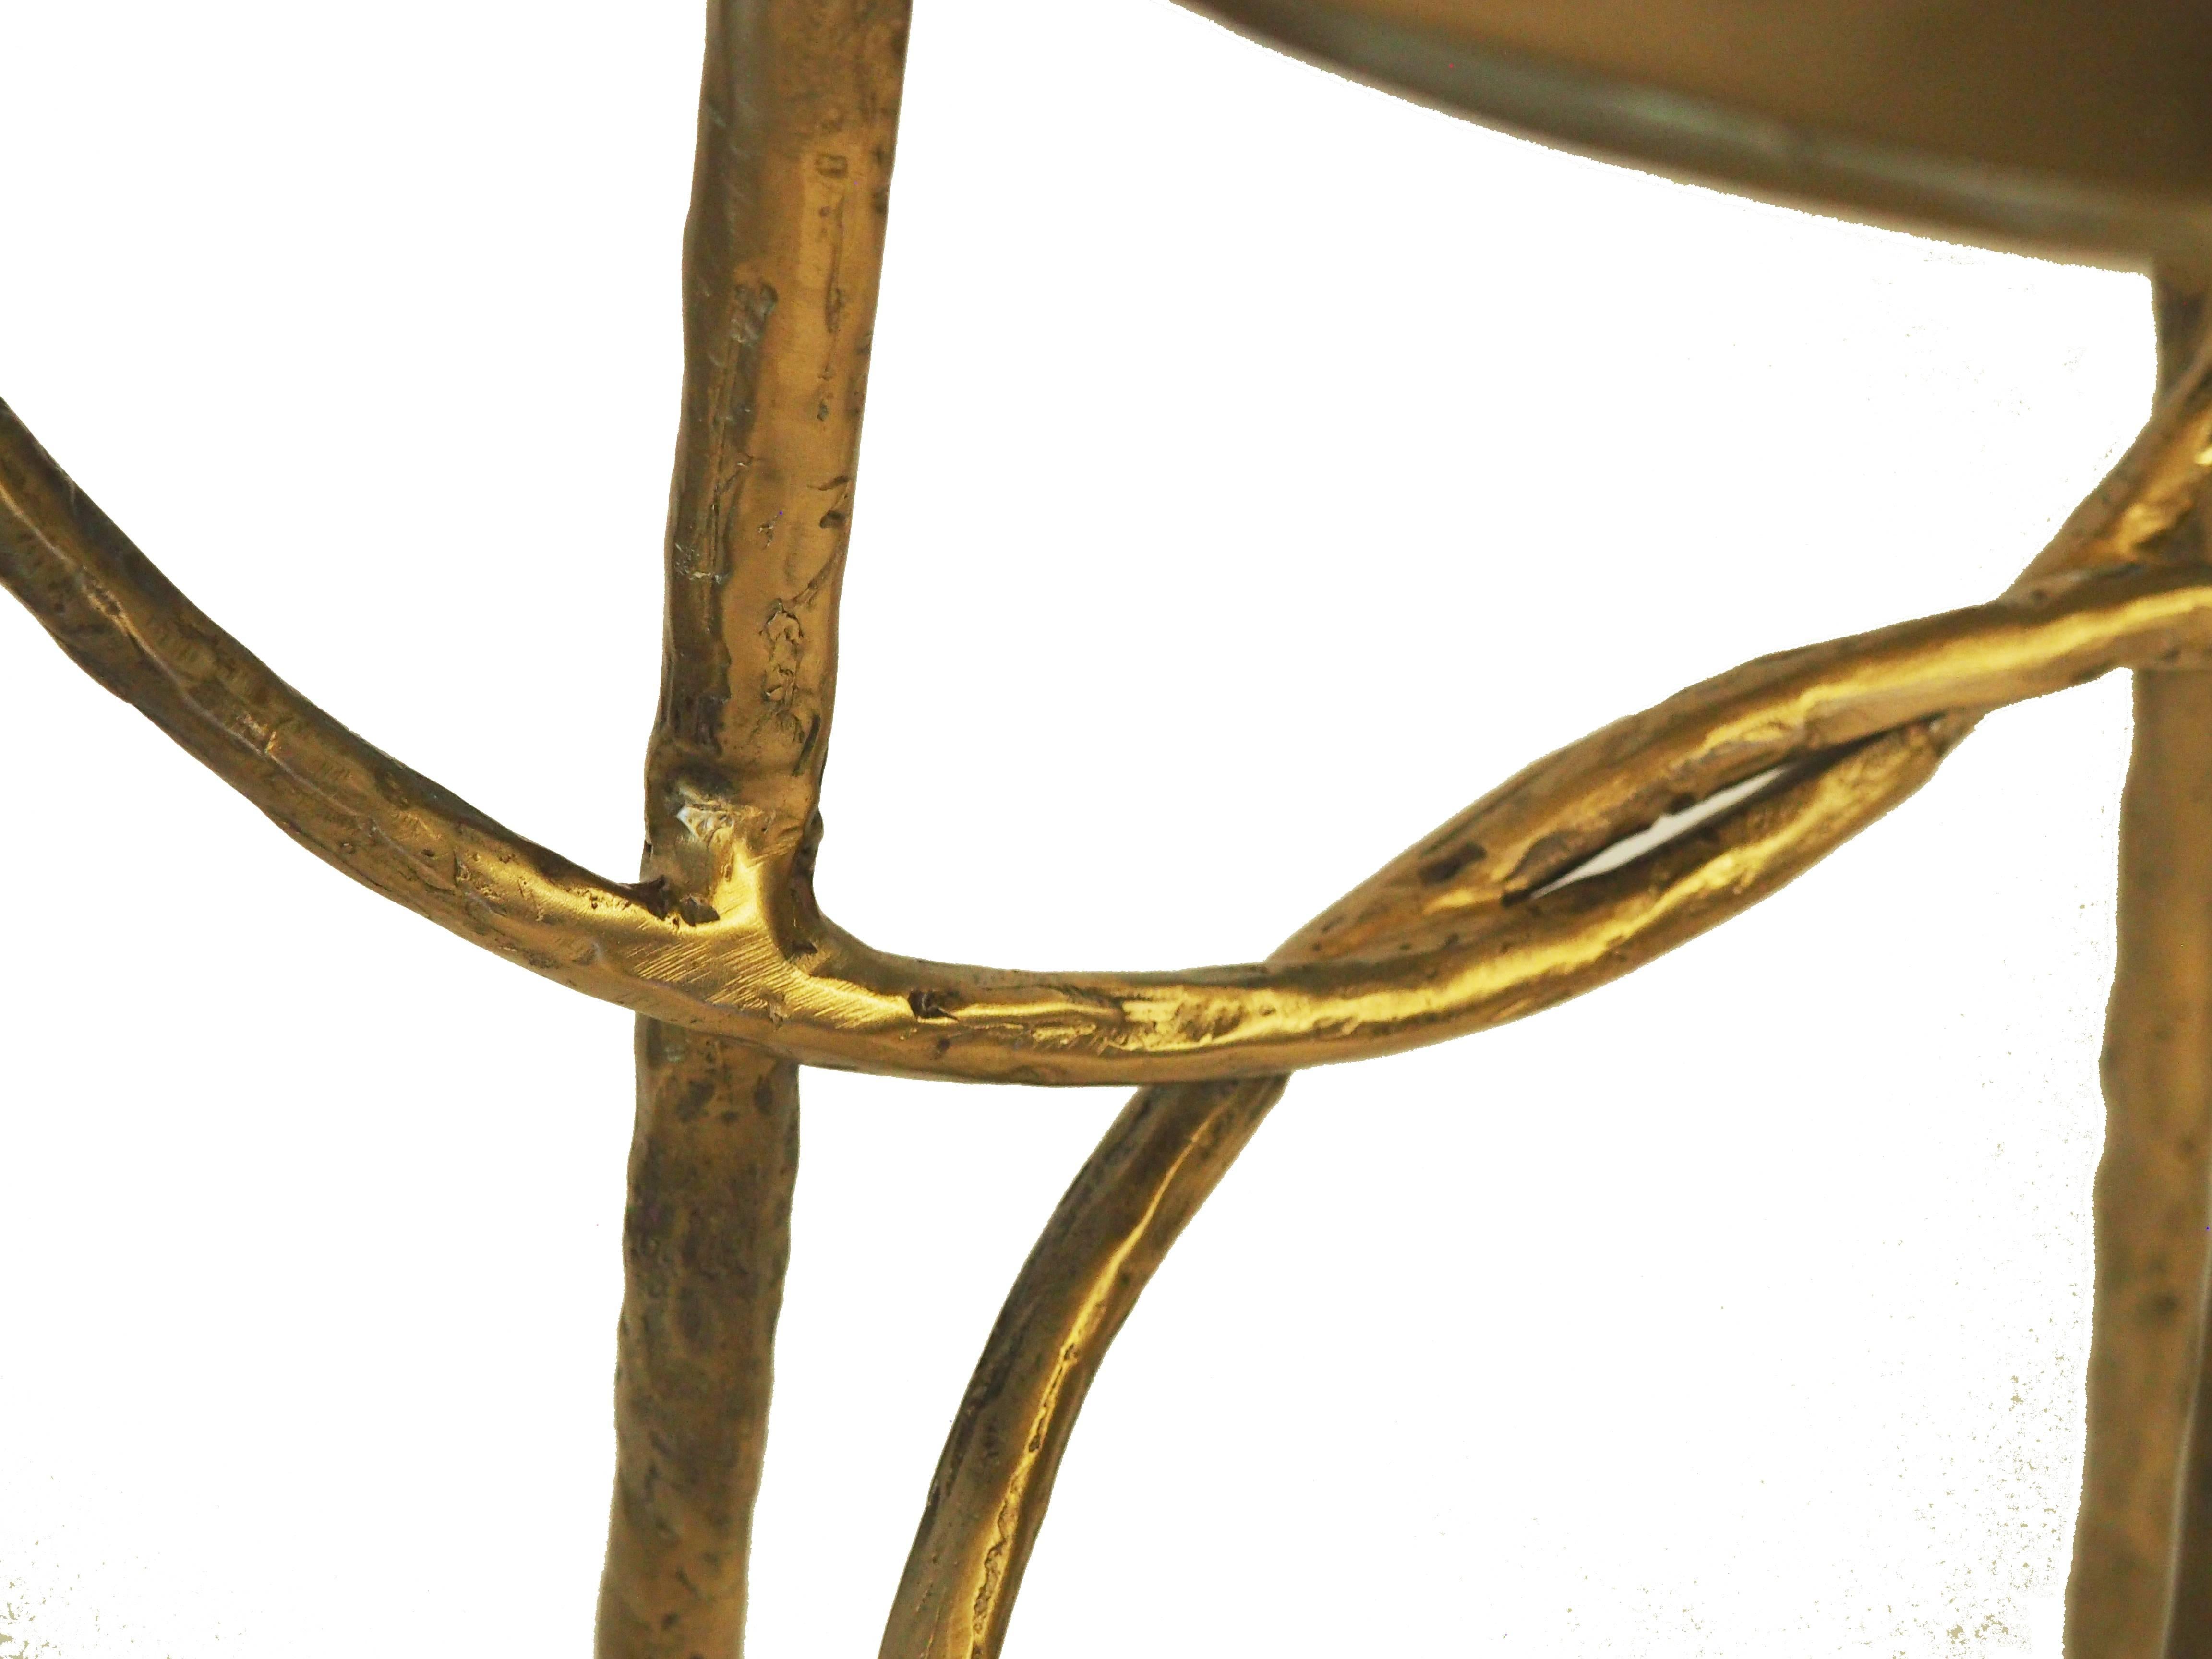 Brass handsculpted stool - Hoola - Misaya
Dimensions: H 67 x W 38 x L 38 cm
Handsculpted brass and marble tables.